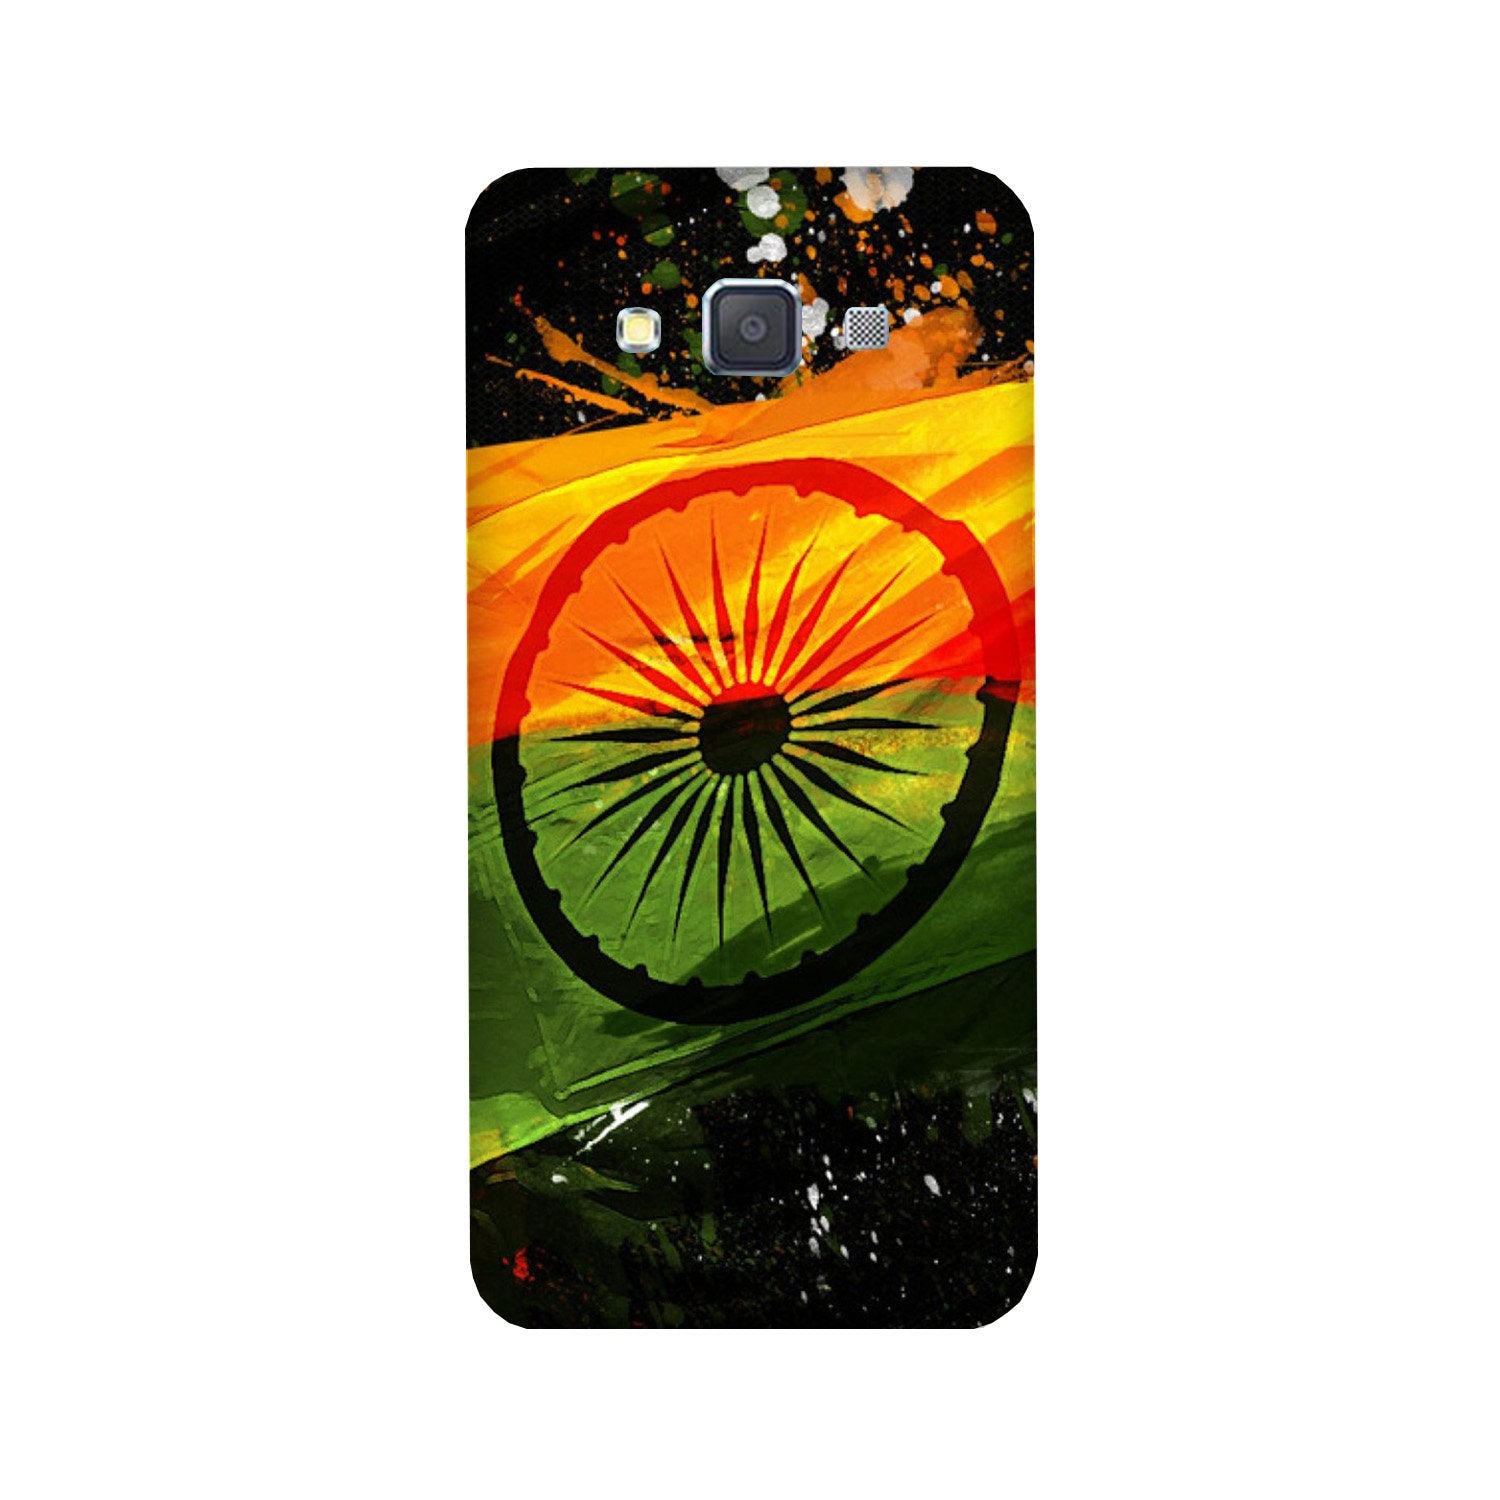 Indian Flag Case for Galaxy Grand Max  (Design - 137)